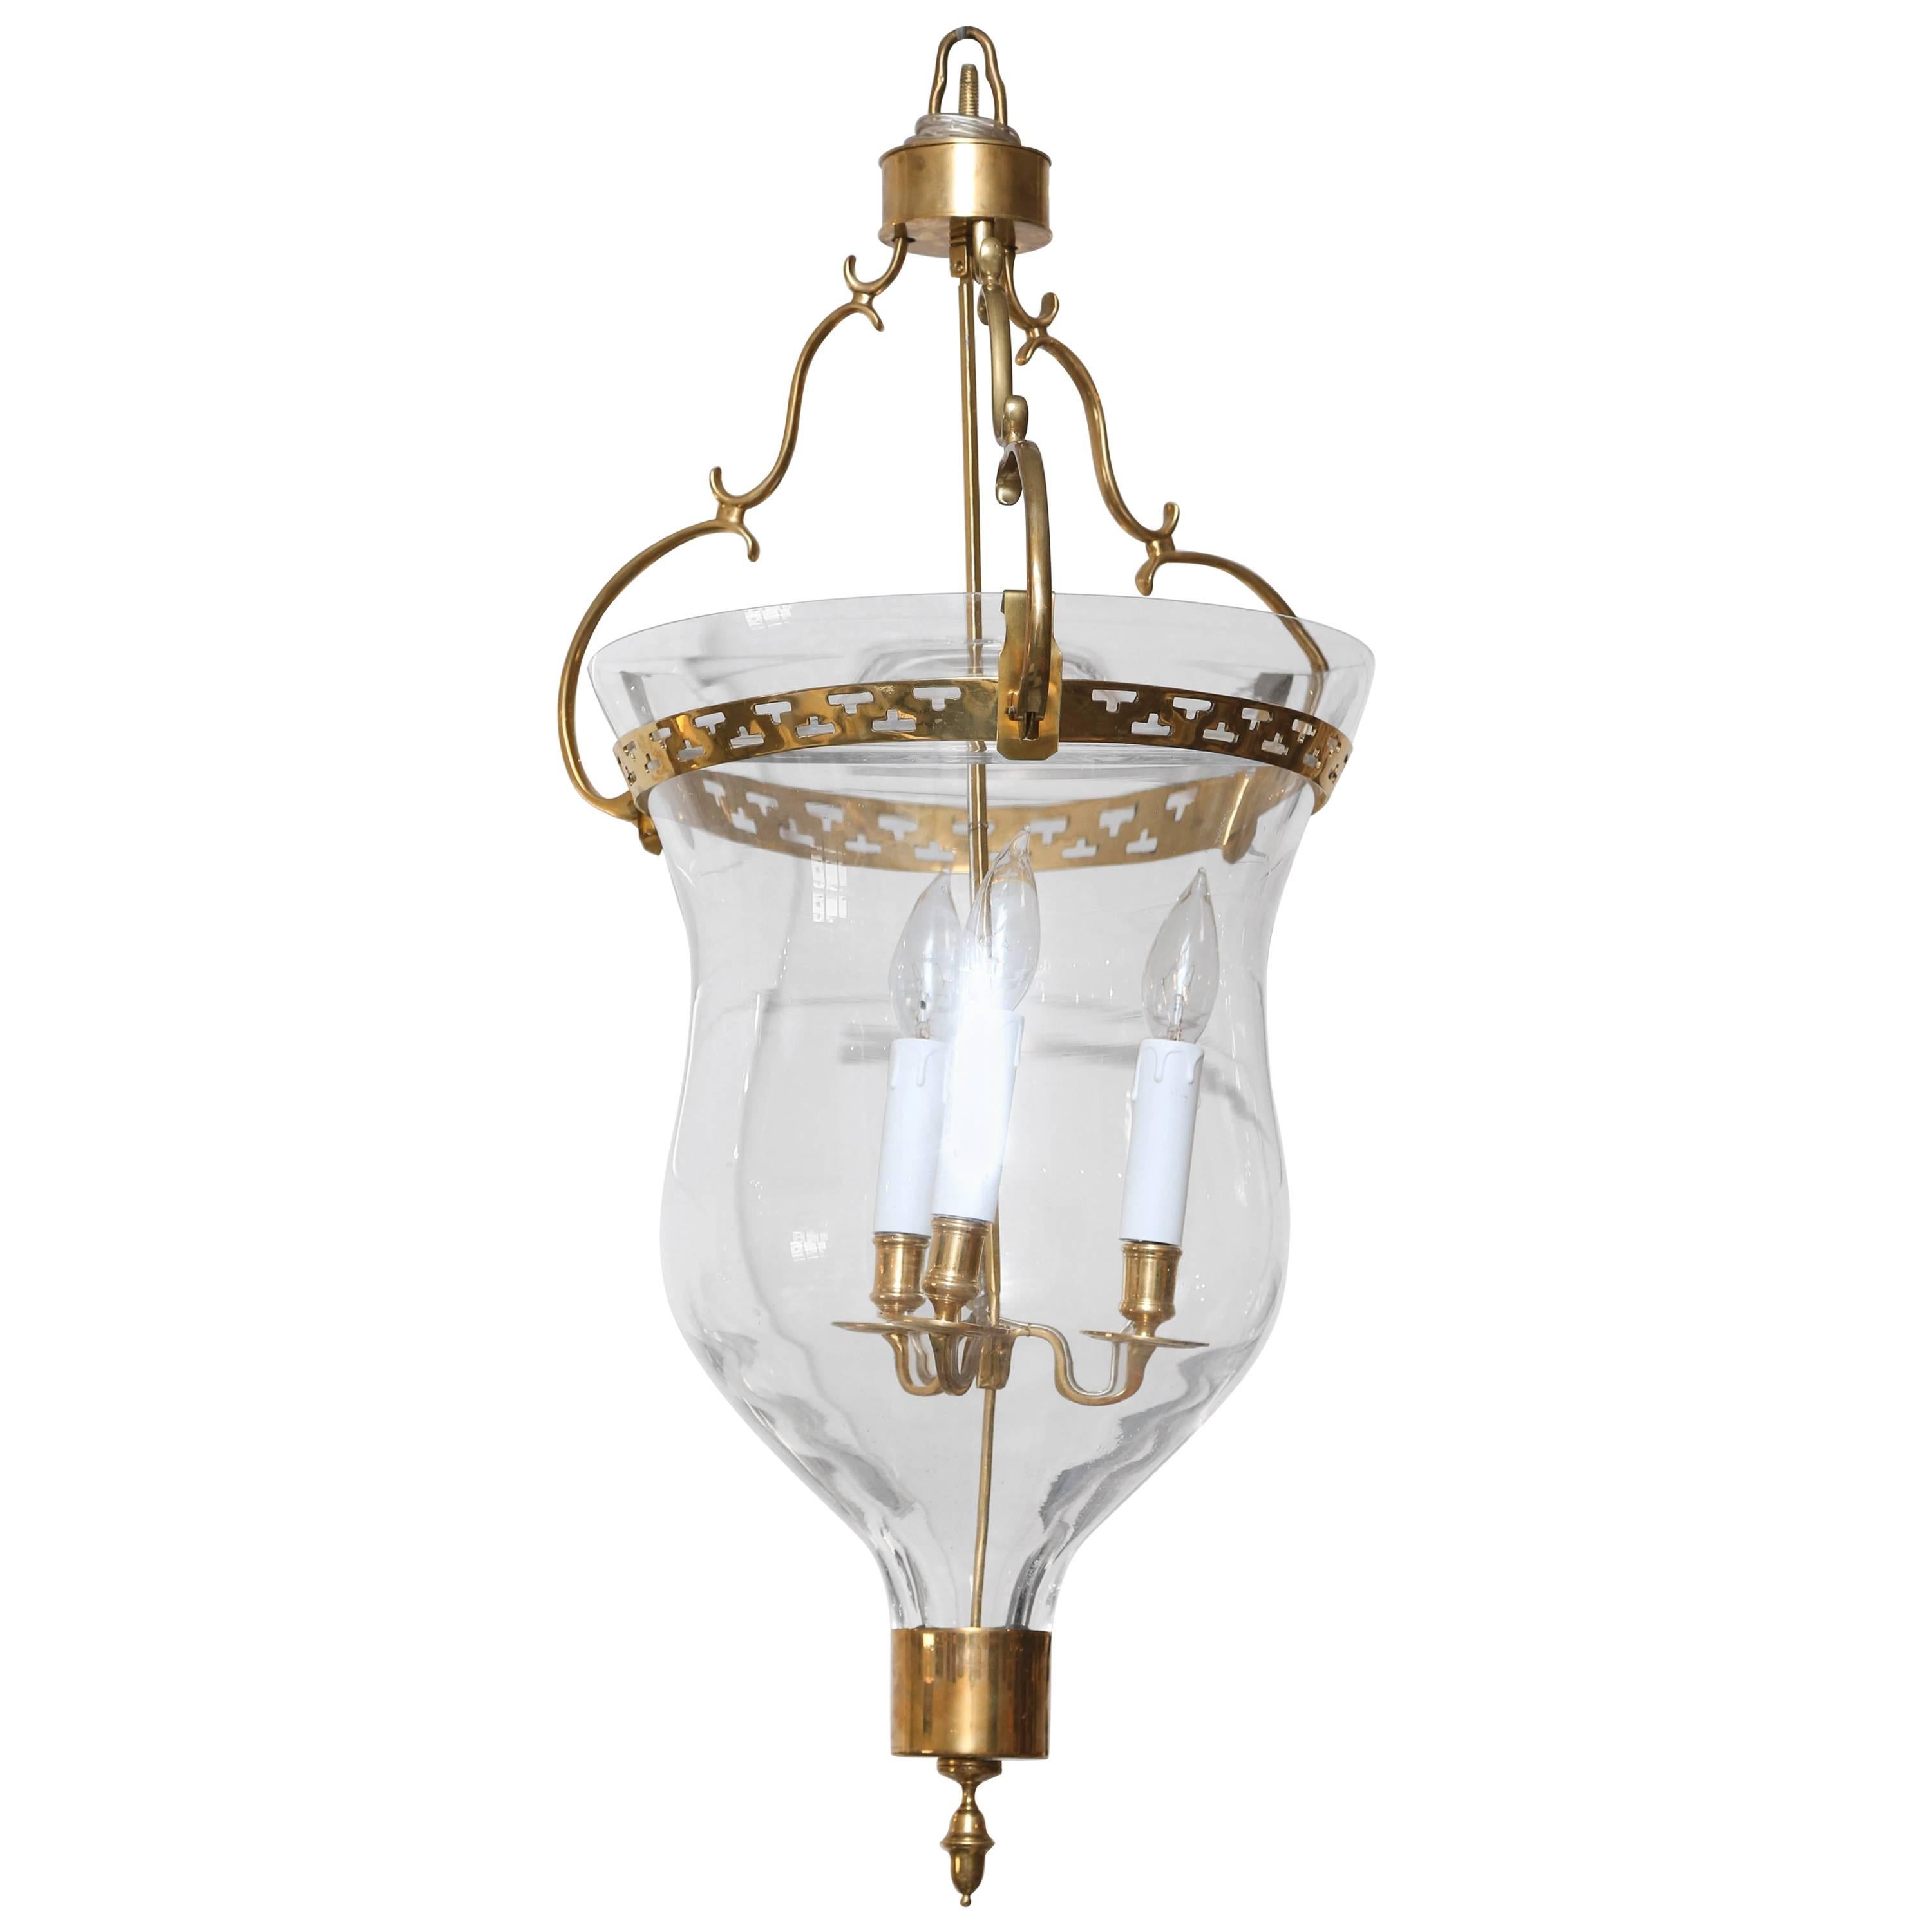 Gustavian Style Glass Bell Jar Lantern with Brass Details, 20th Century For Sale